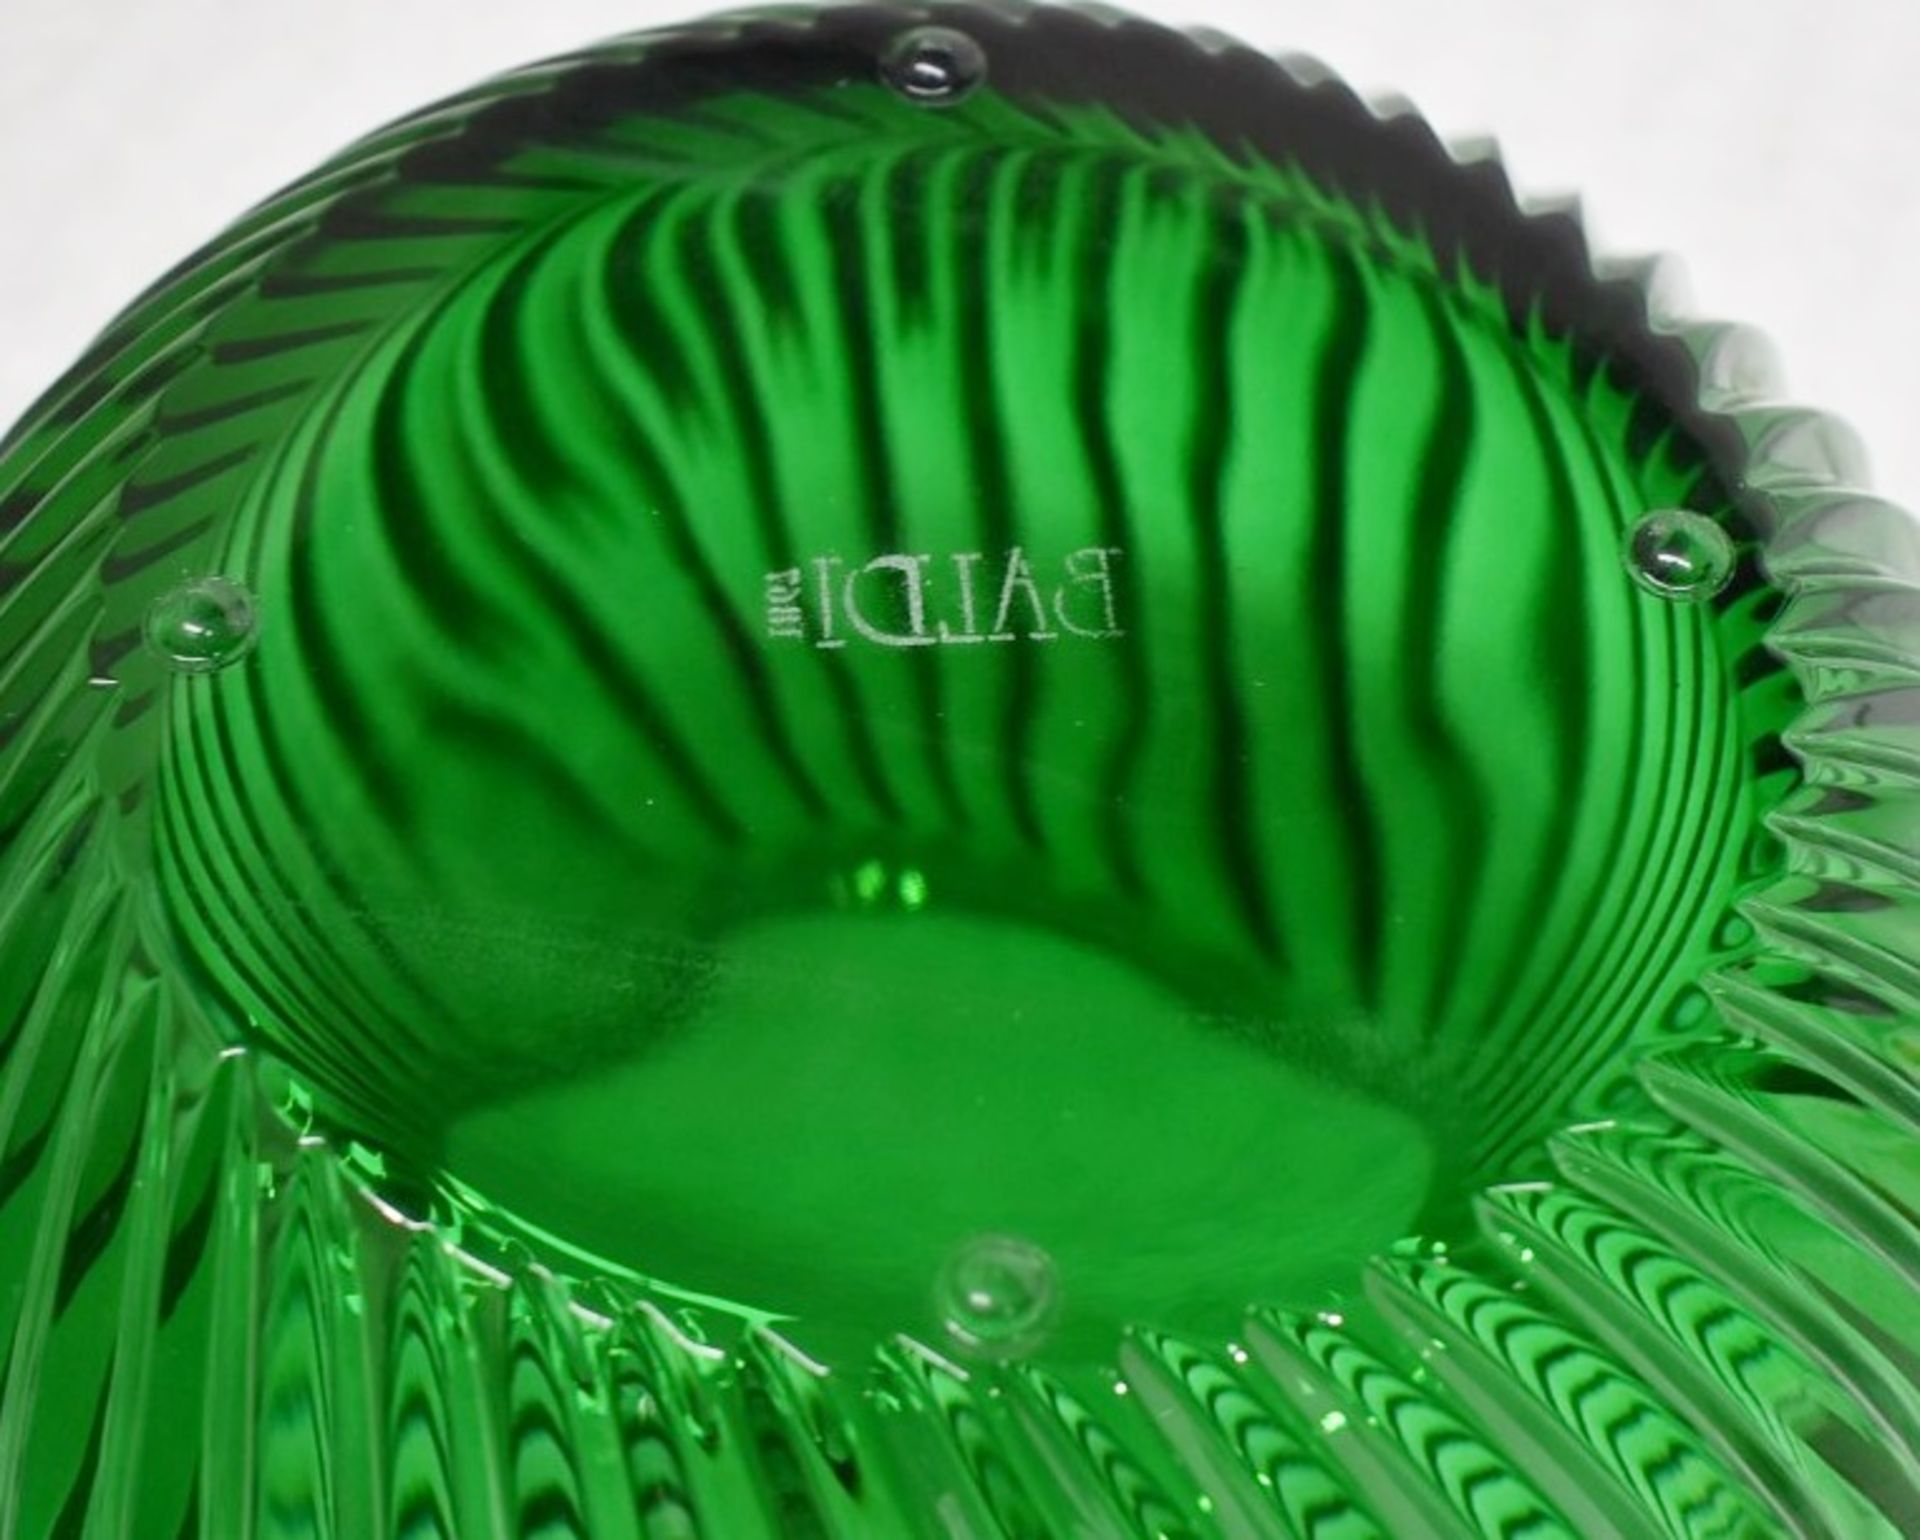 1 x BALDI 'Home Jewels' Italian Hand-crafted Artisan Crystal Bowl In Green - Dimensions: Height 15cm - Image 4 of 4